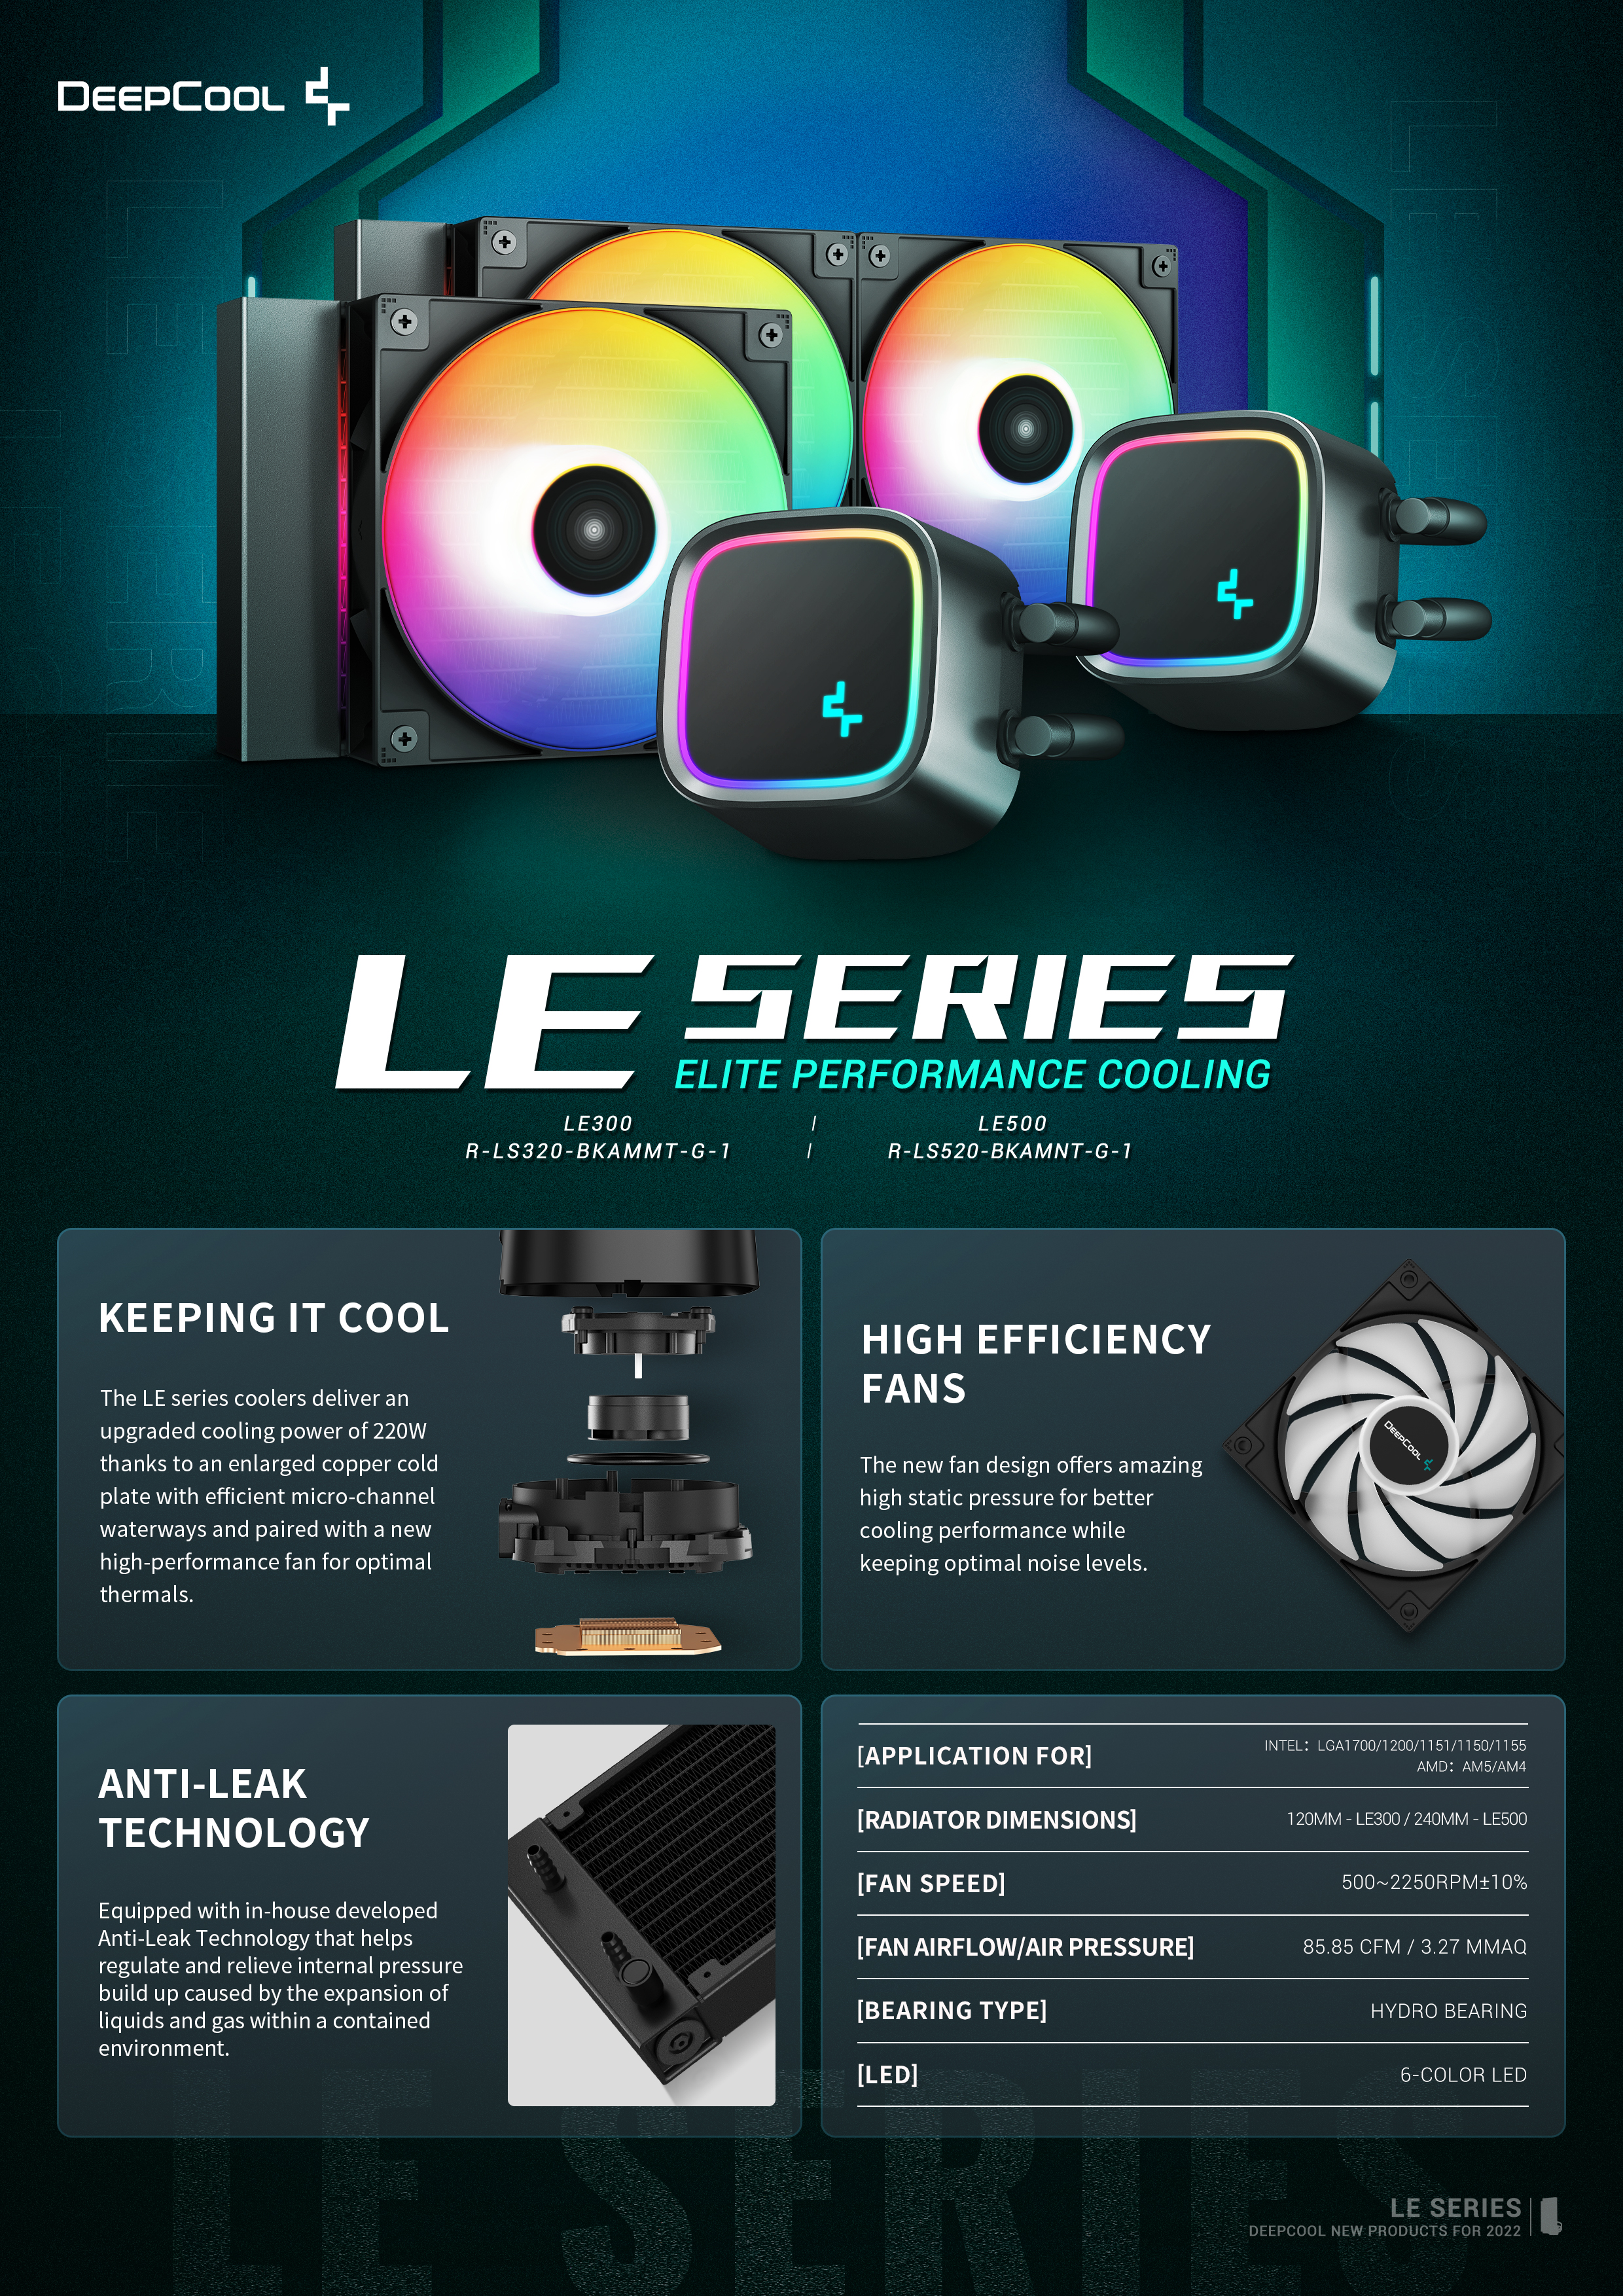 A large marketing image providing additional information about the product DeepCool LE500 LED 240mm AIO CPU Cooler - Additional alt info not provided